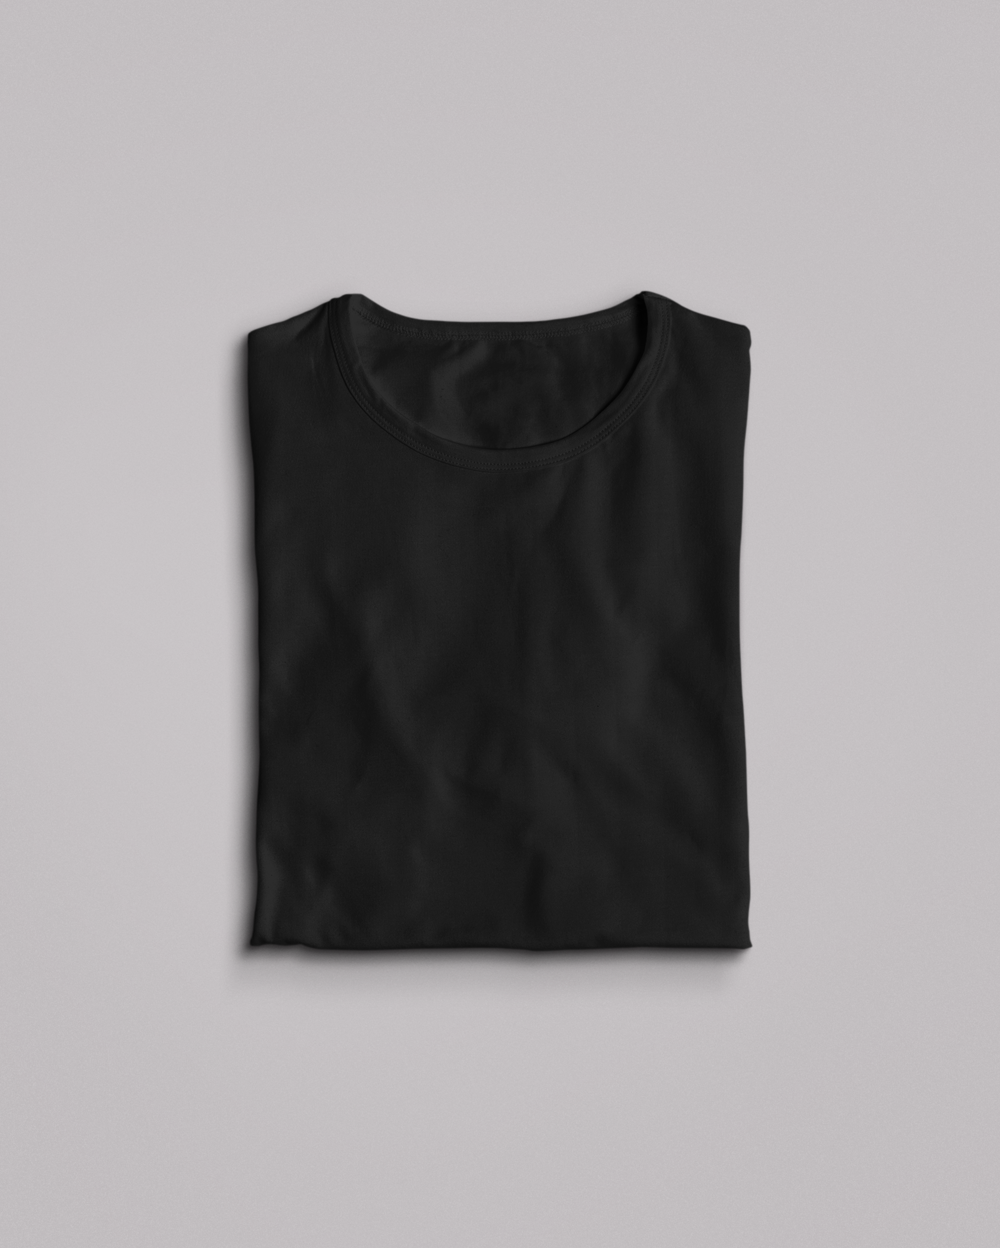 A sleek black men's t-shirt designed for comfort and style.